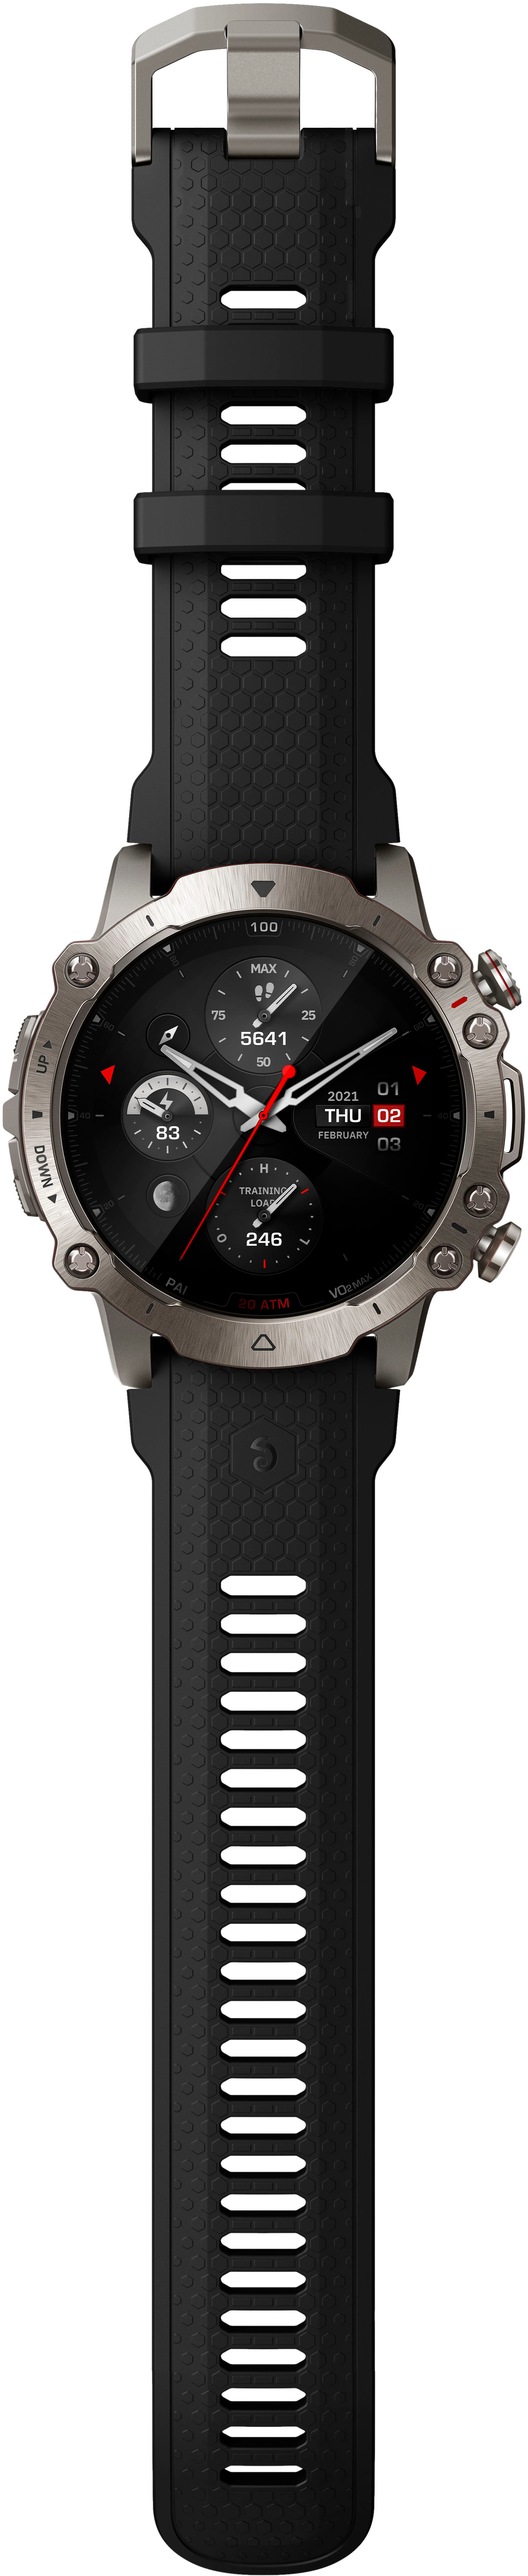 Huami will unveil the Amazfit Falcon rugged watch with GPS, SpO2, 4GB of  memory, Adidas Running and Strava support